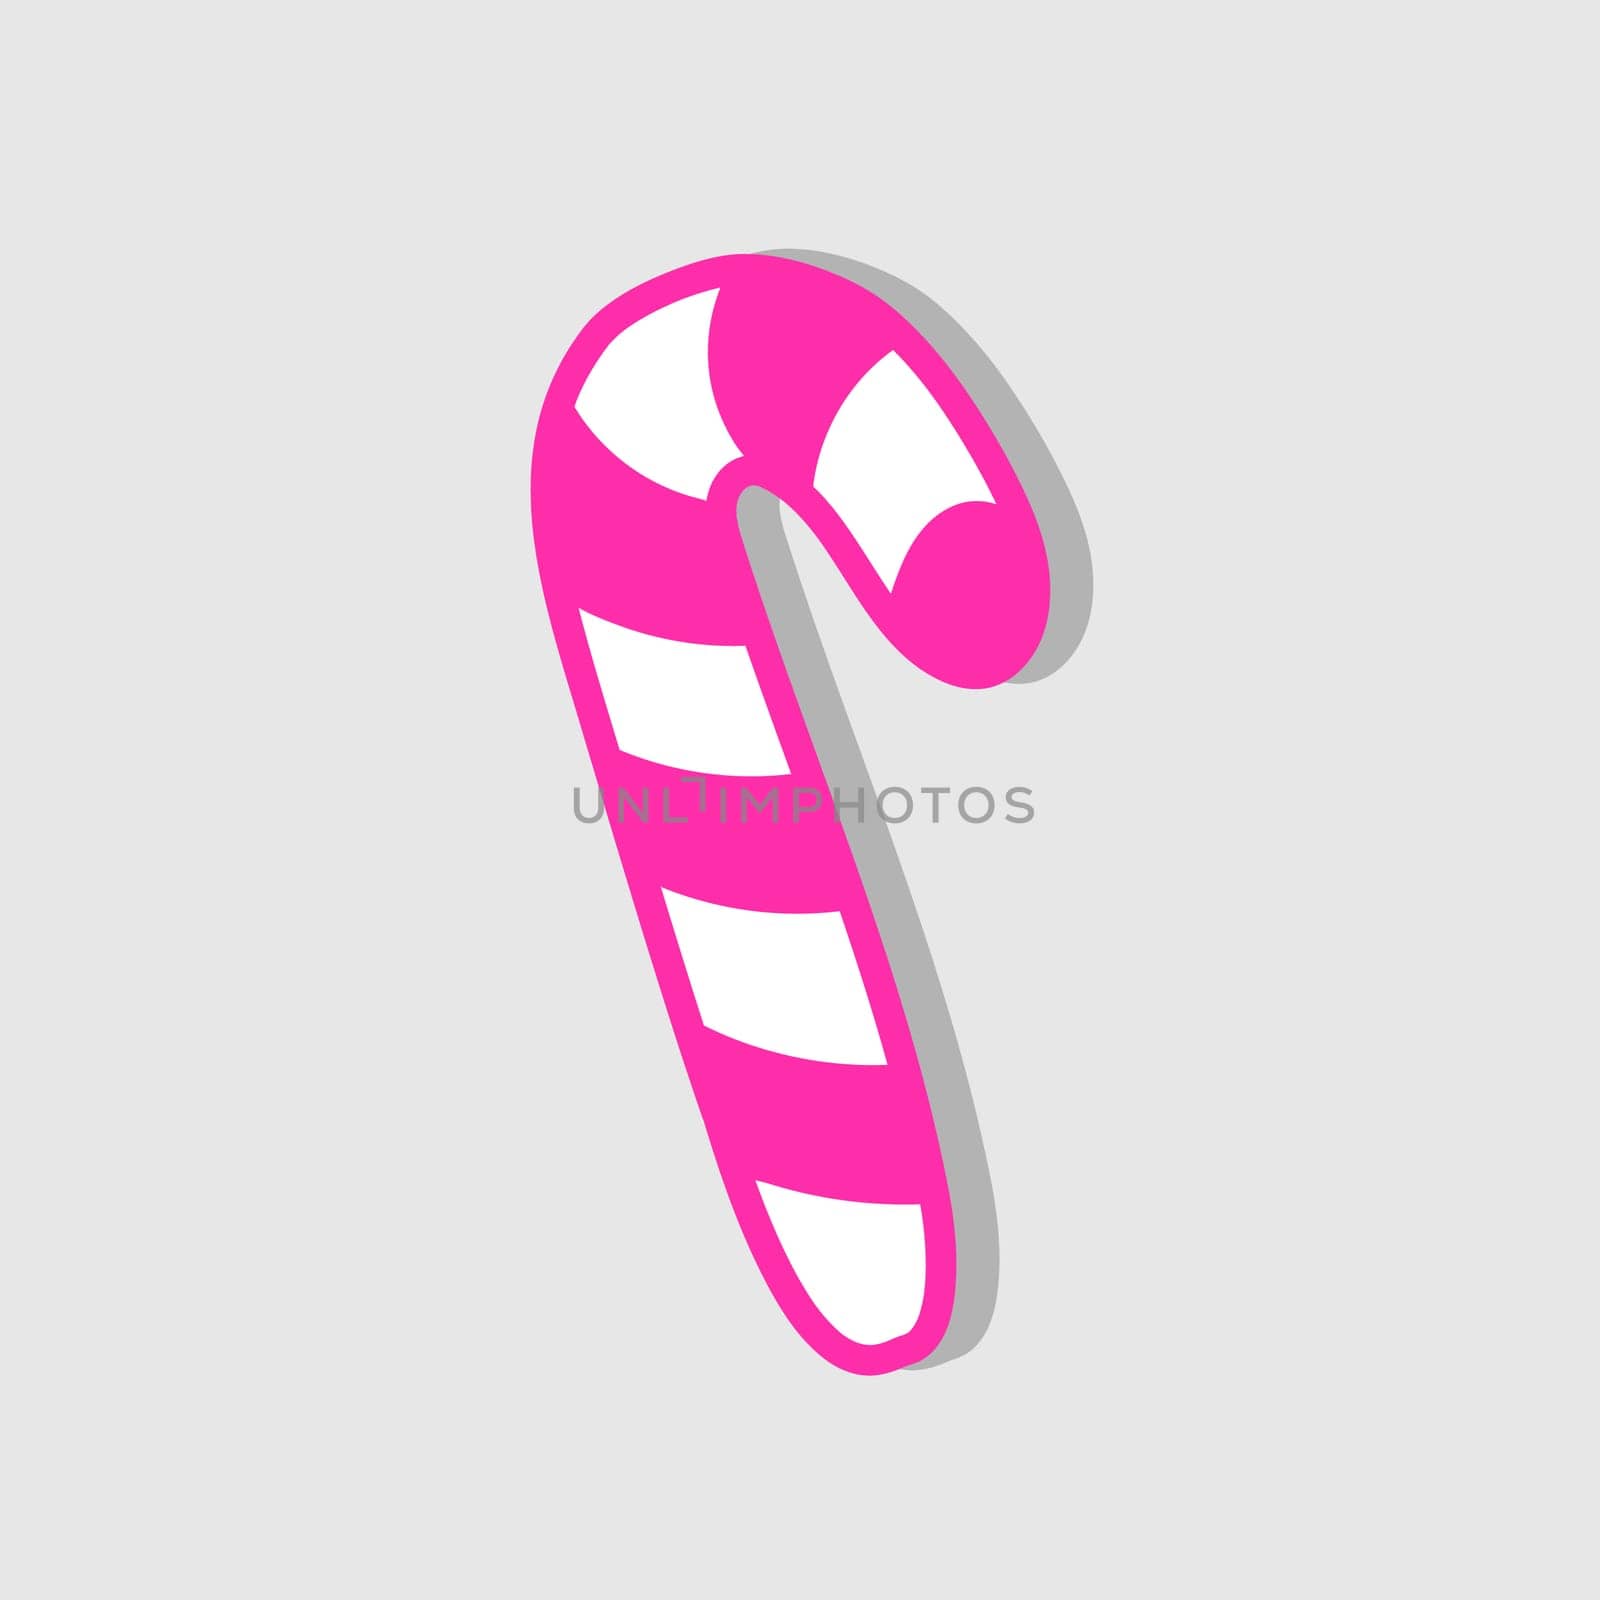 Cute Christmas candy cane - vector icon in pink color. Striped candy by natali_brill